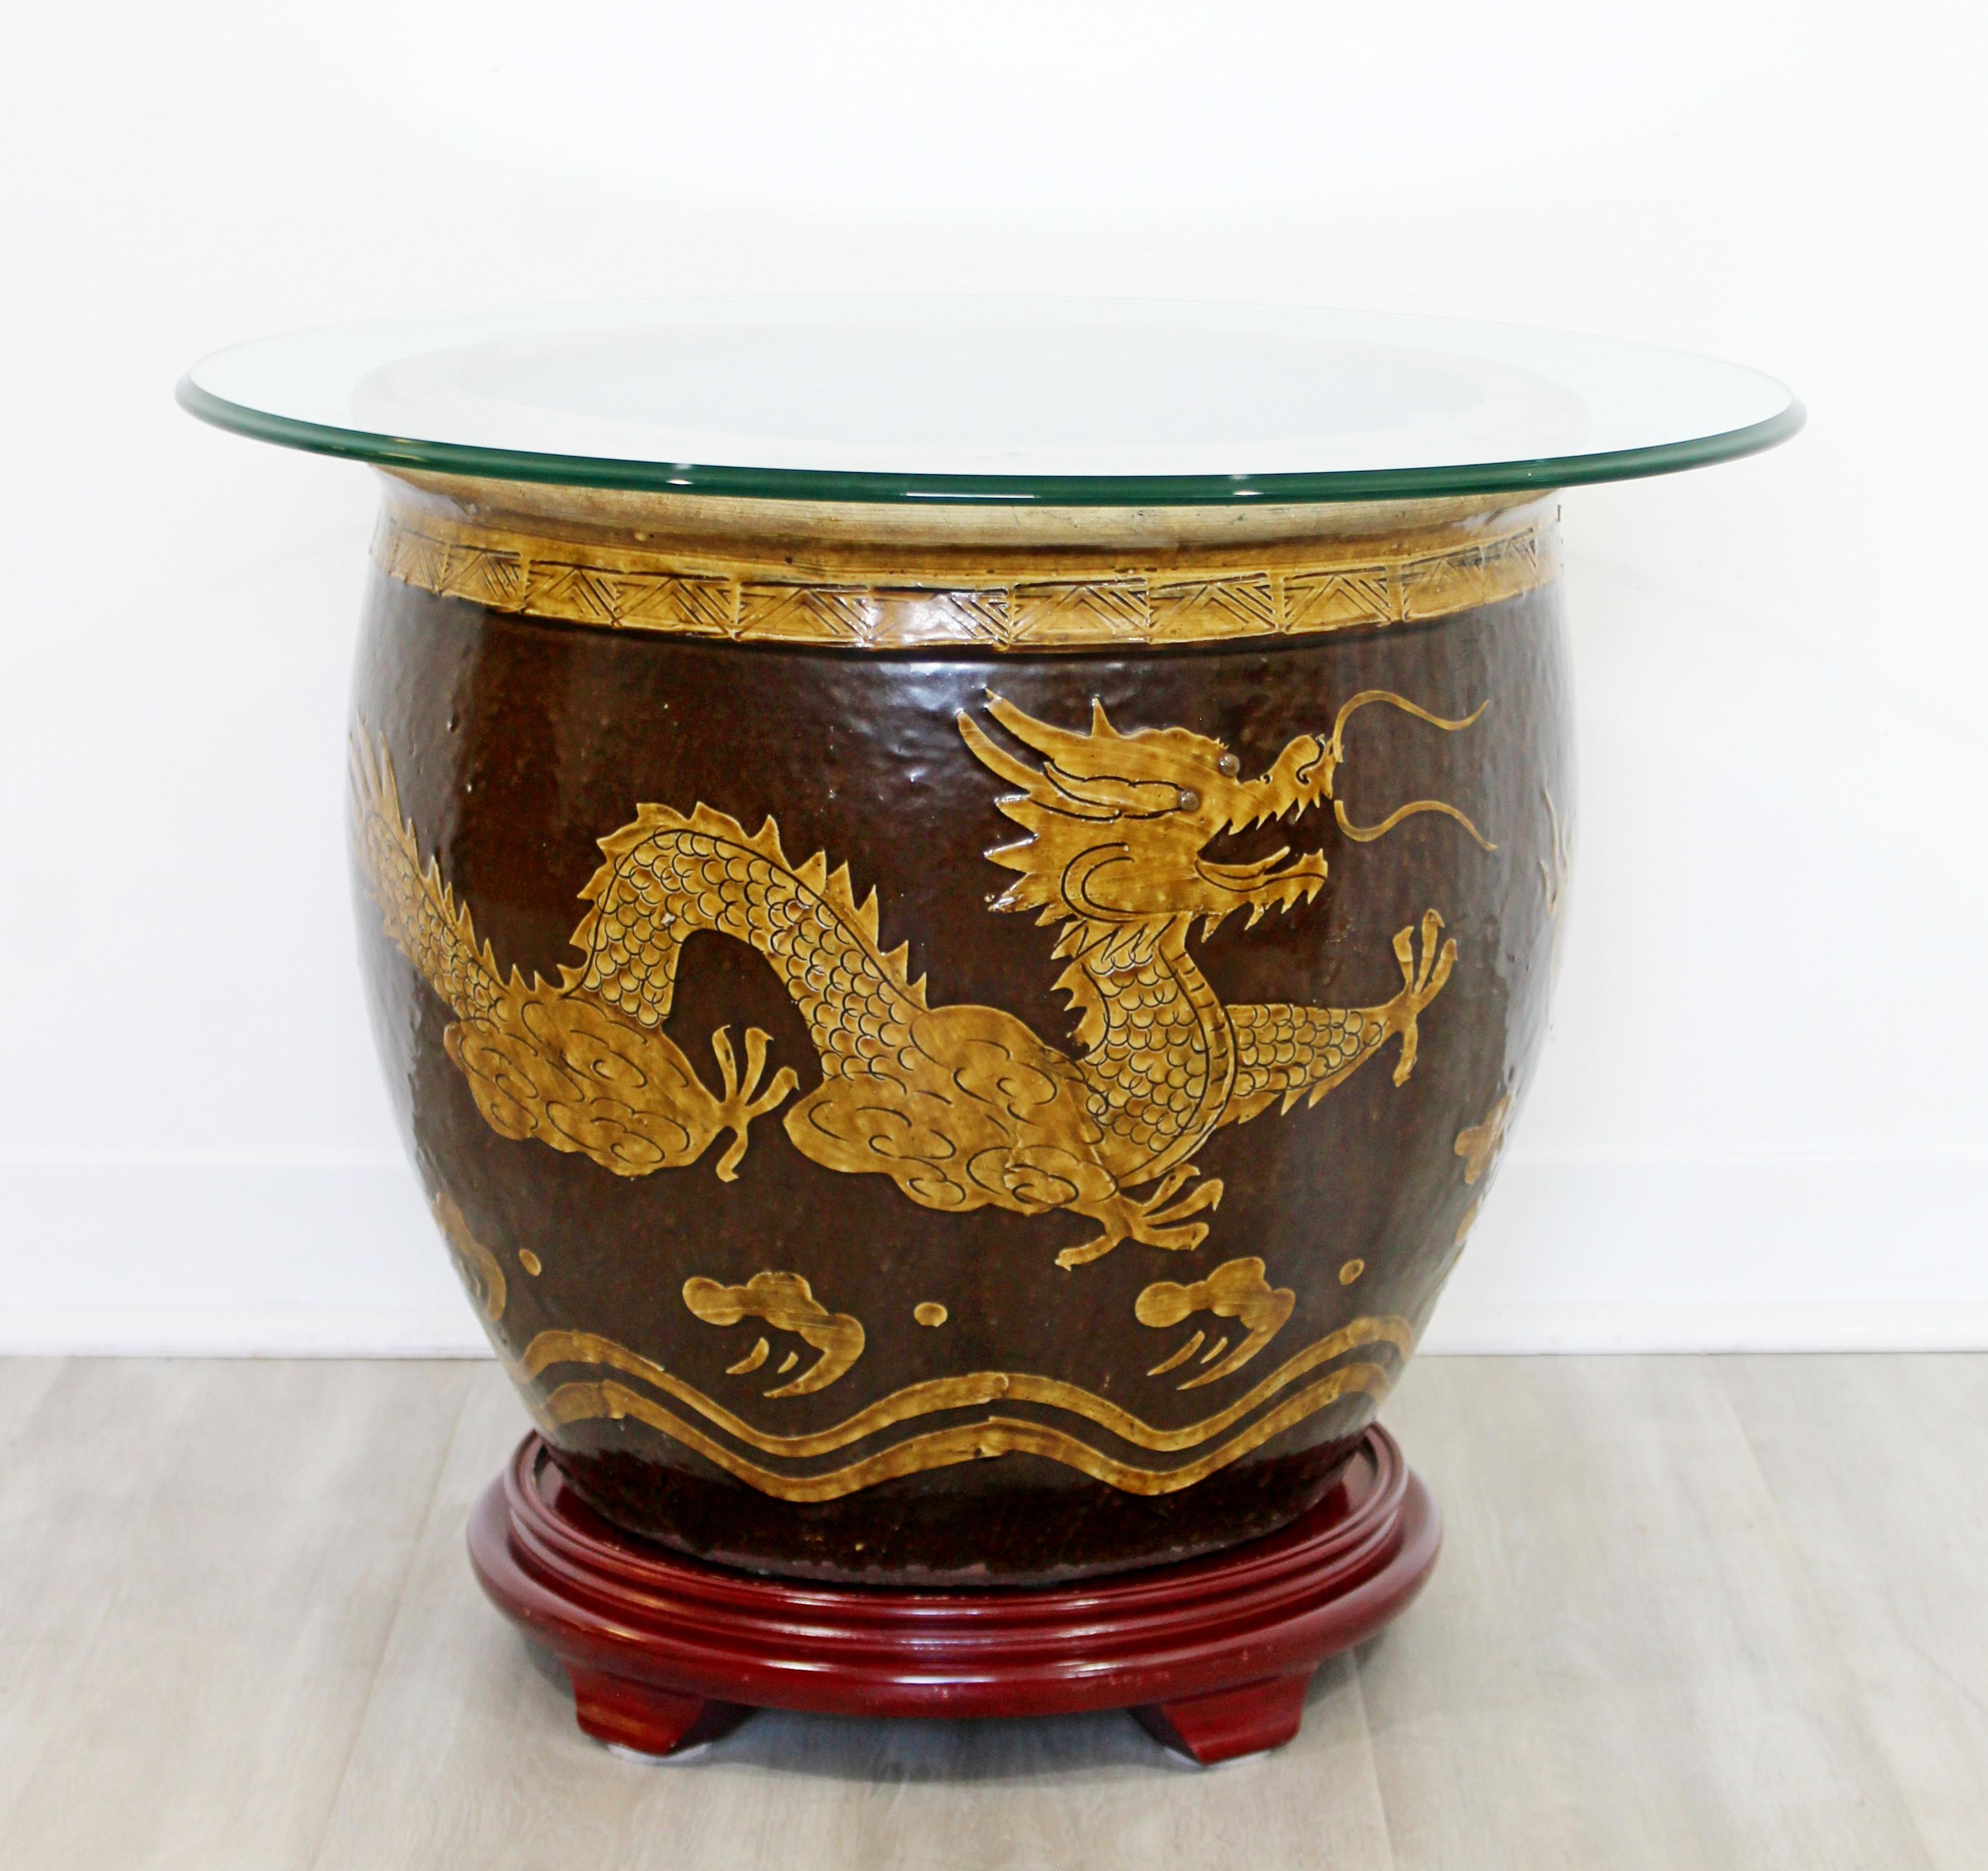 For your consideration is a magnificent, jardinière ceramic vessel or planter, with a glass top, making it a side table, with a dragon motif. In very good vintage condition. The dimensions are 24